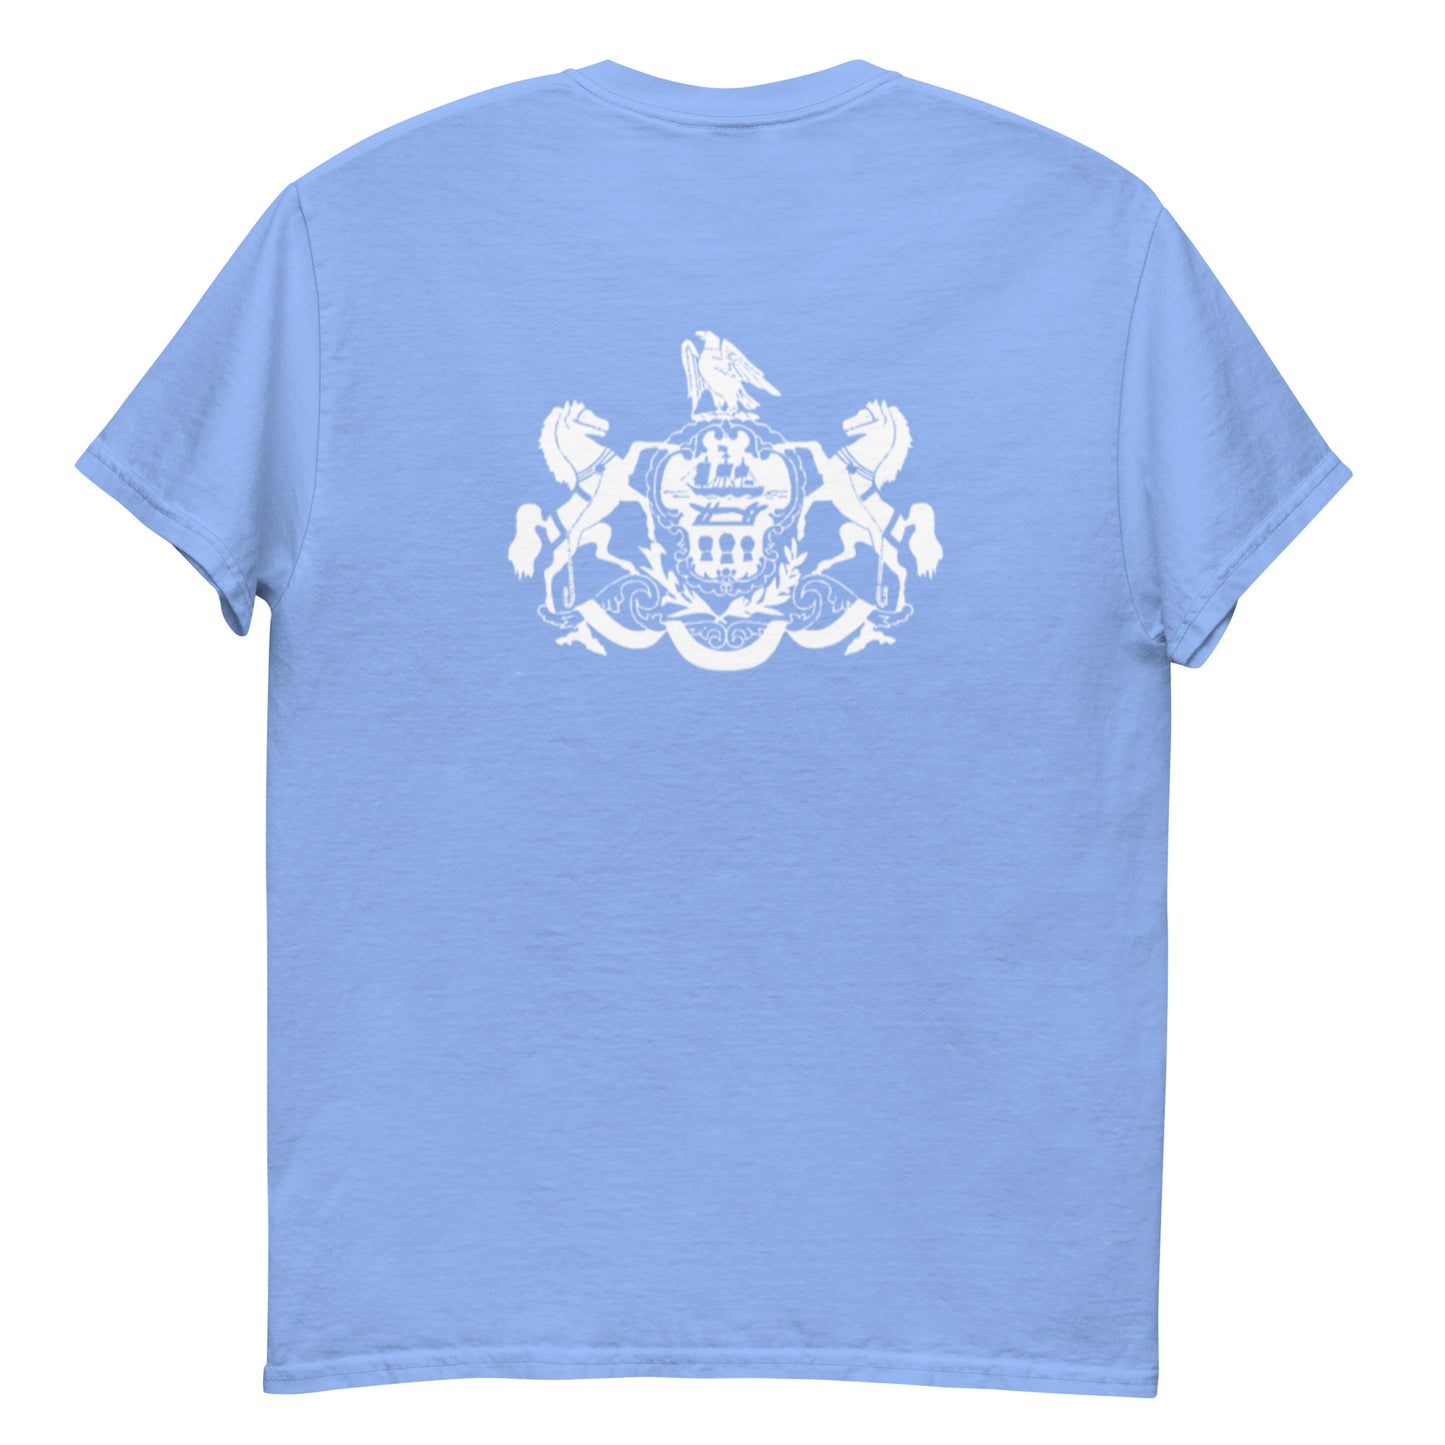 Erie All American - Back Crest Unisex Tee